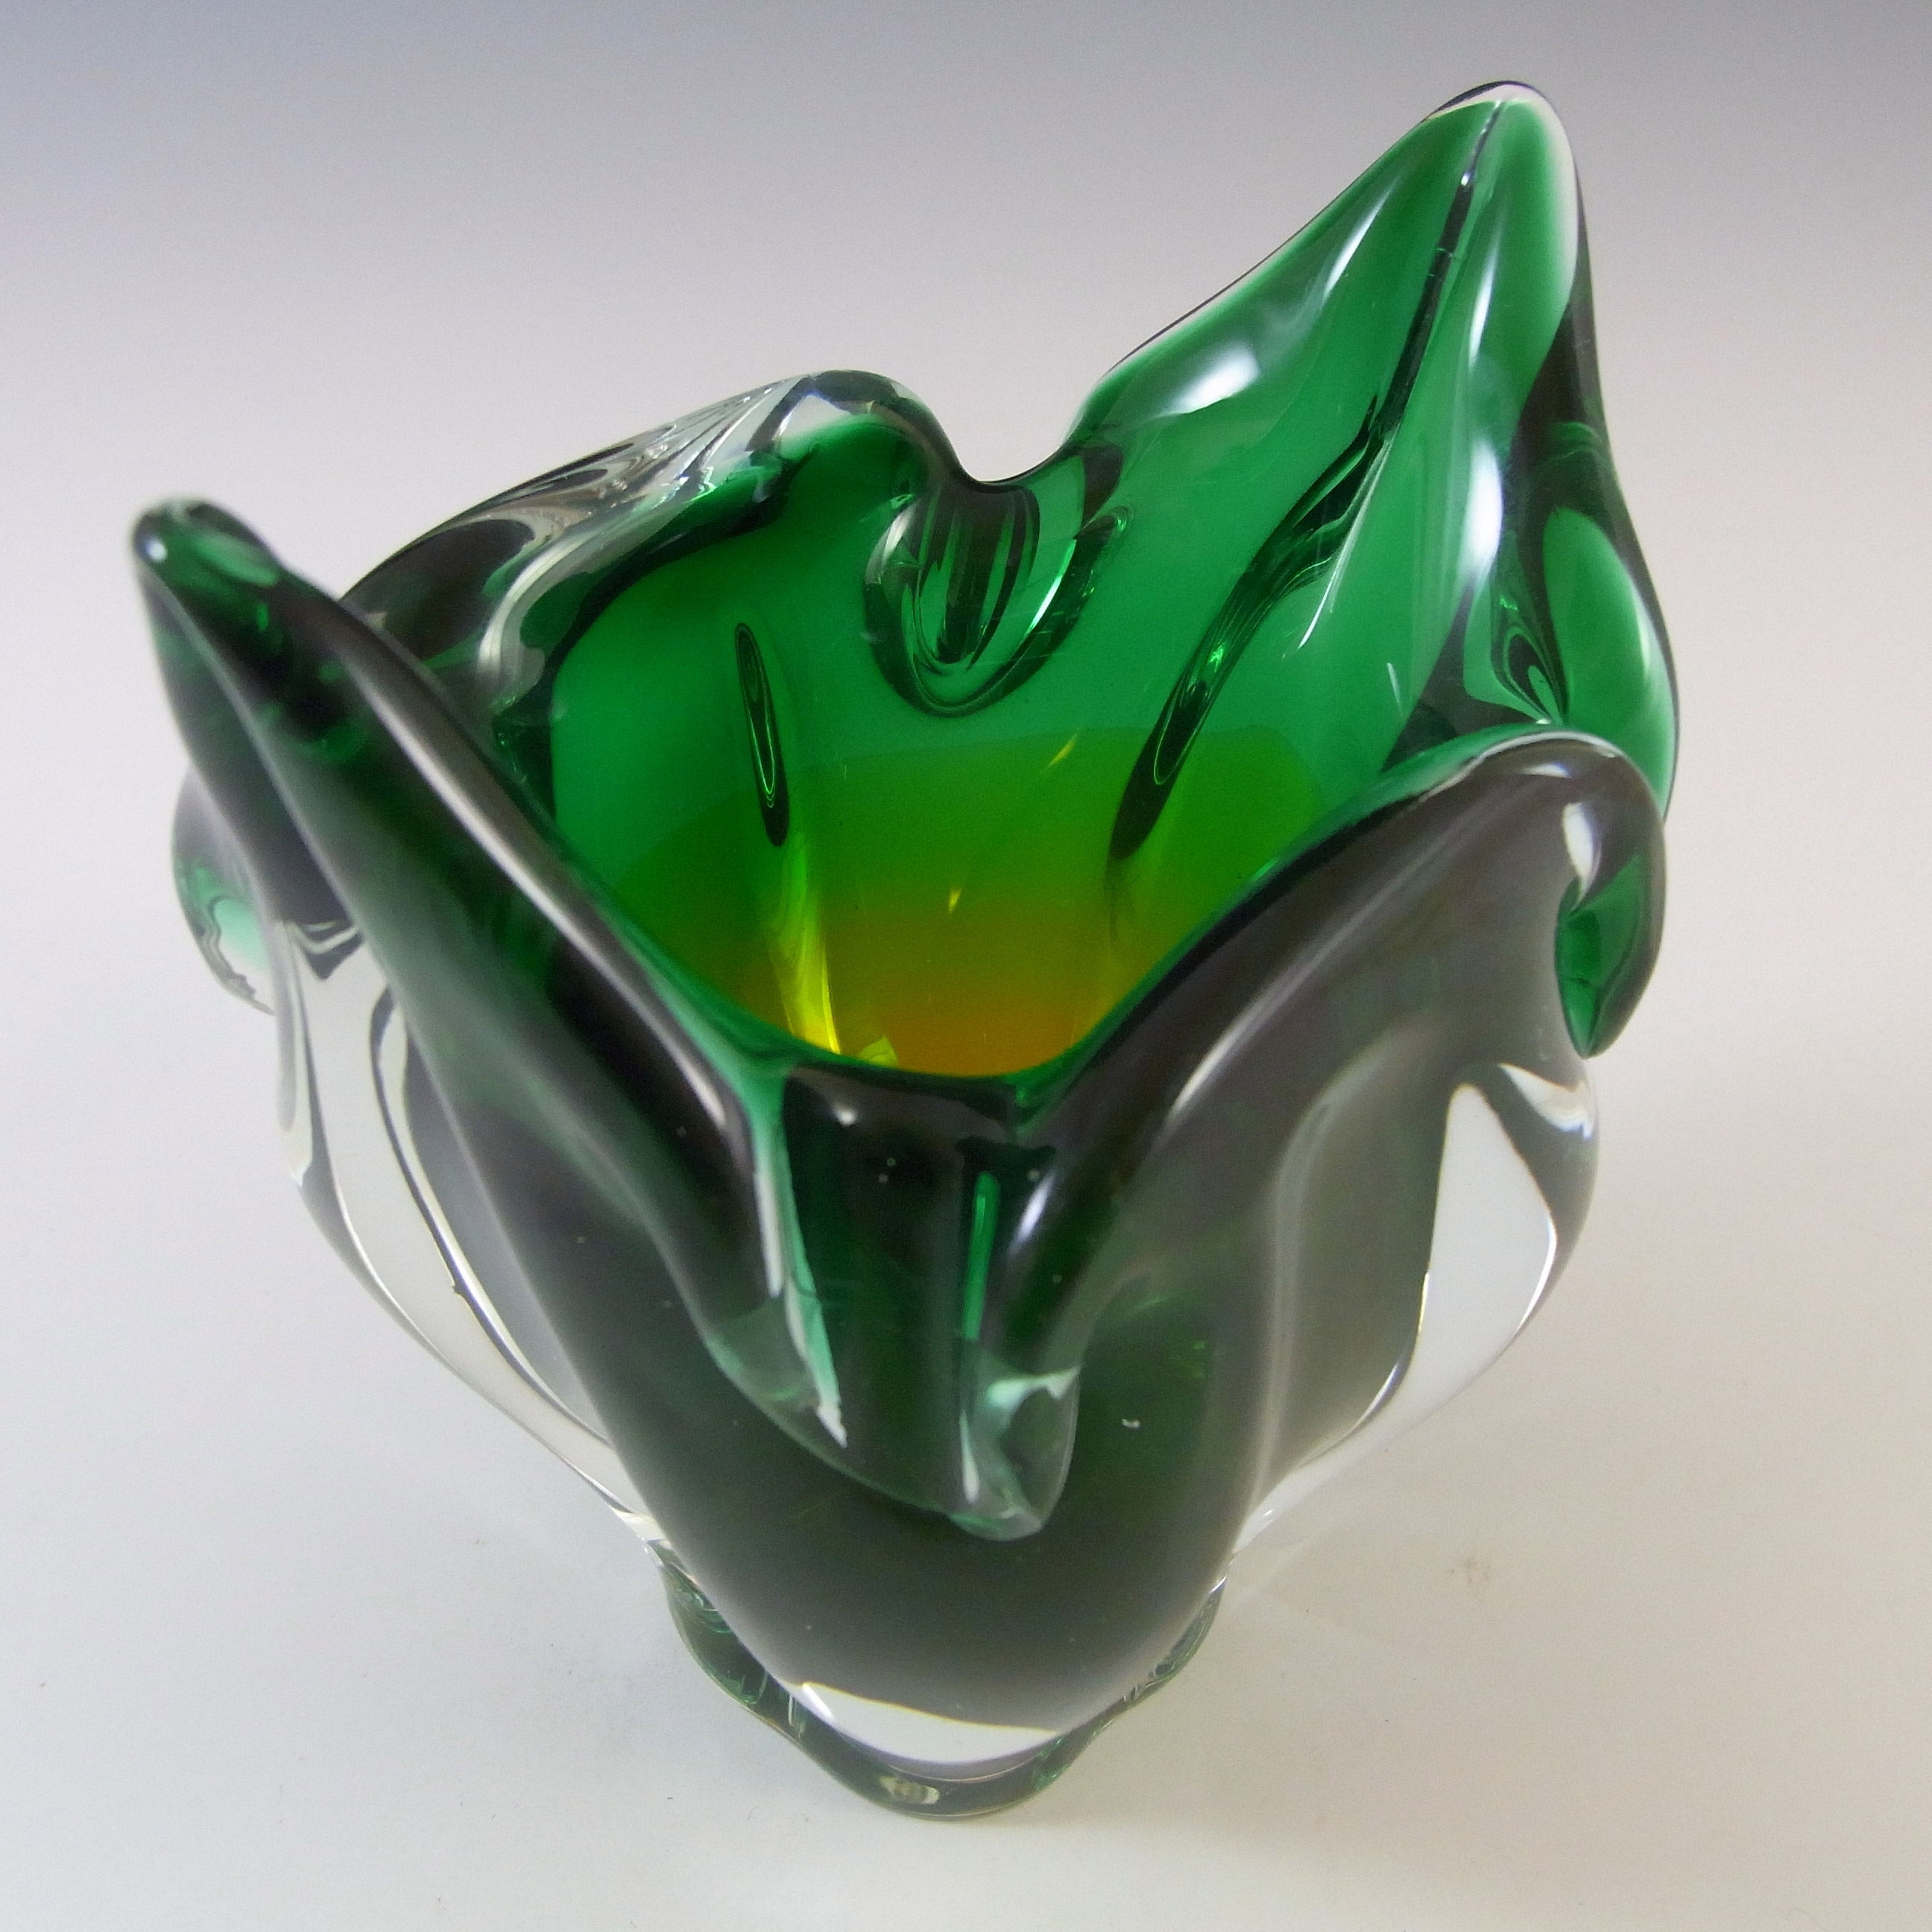 Chřibská #296/4/13 Czech Green & Yellow Glass Vase - Click Image to Close